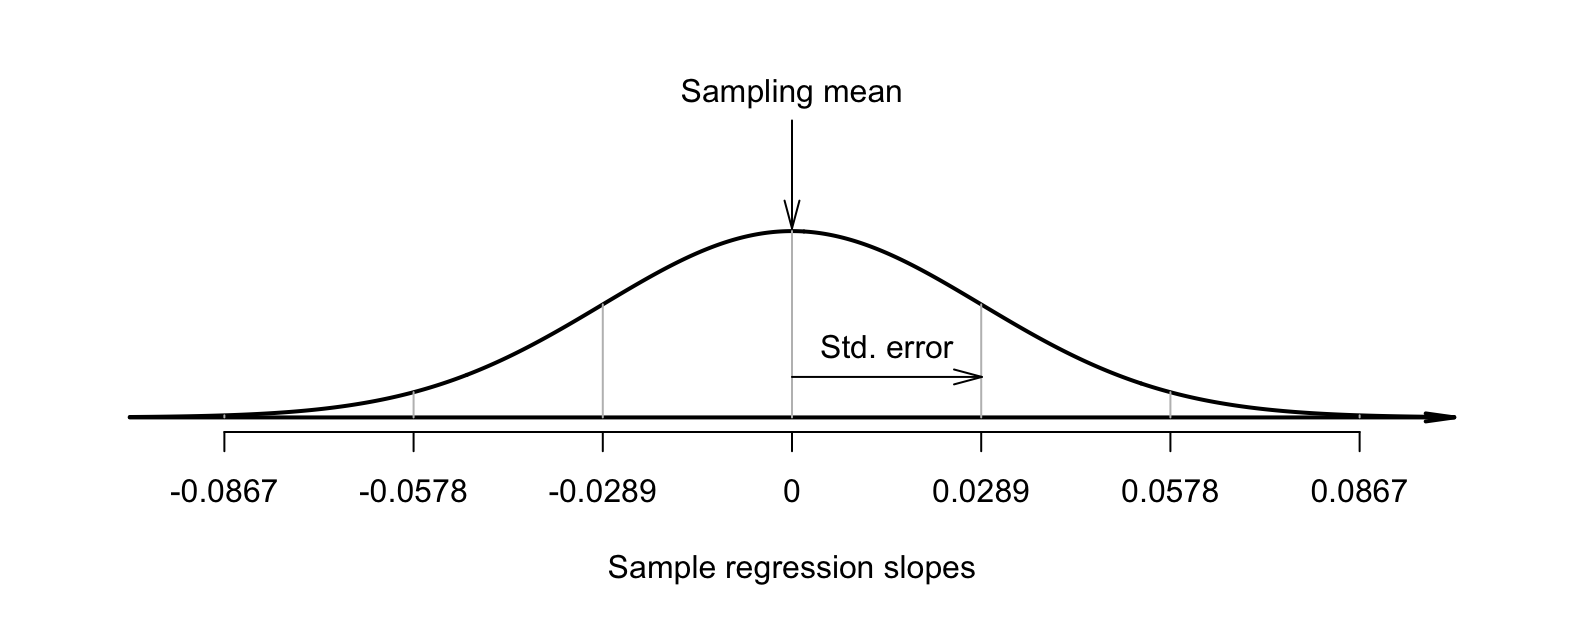 The distribution of sample slopes for the red-deer data, if the population slope is $\beta_1 = 0$